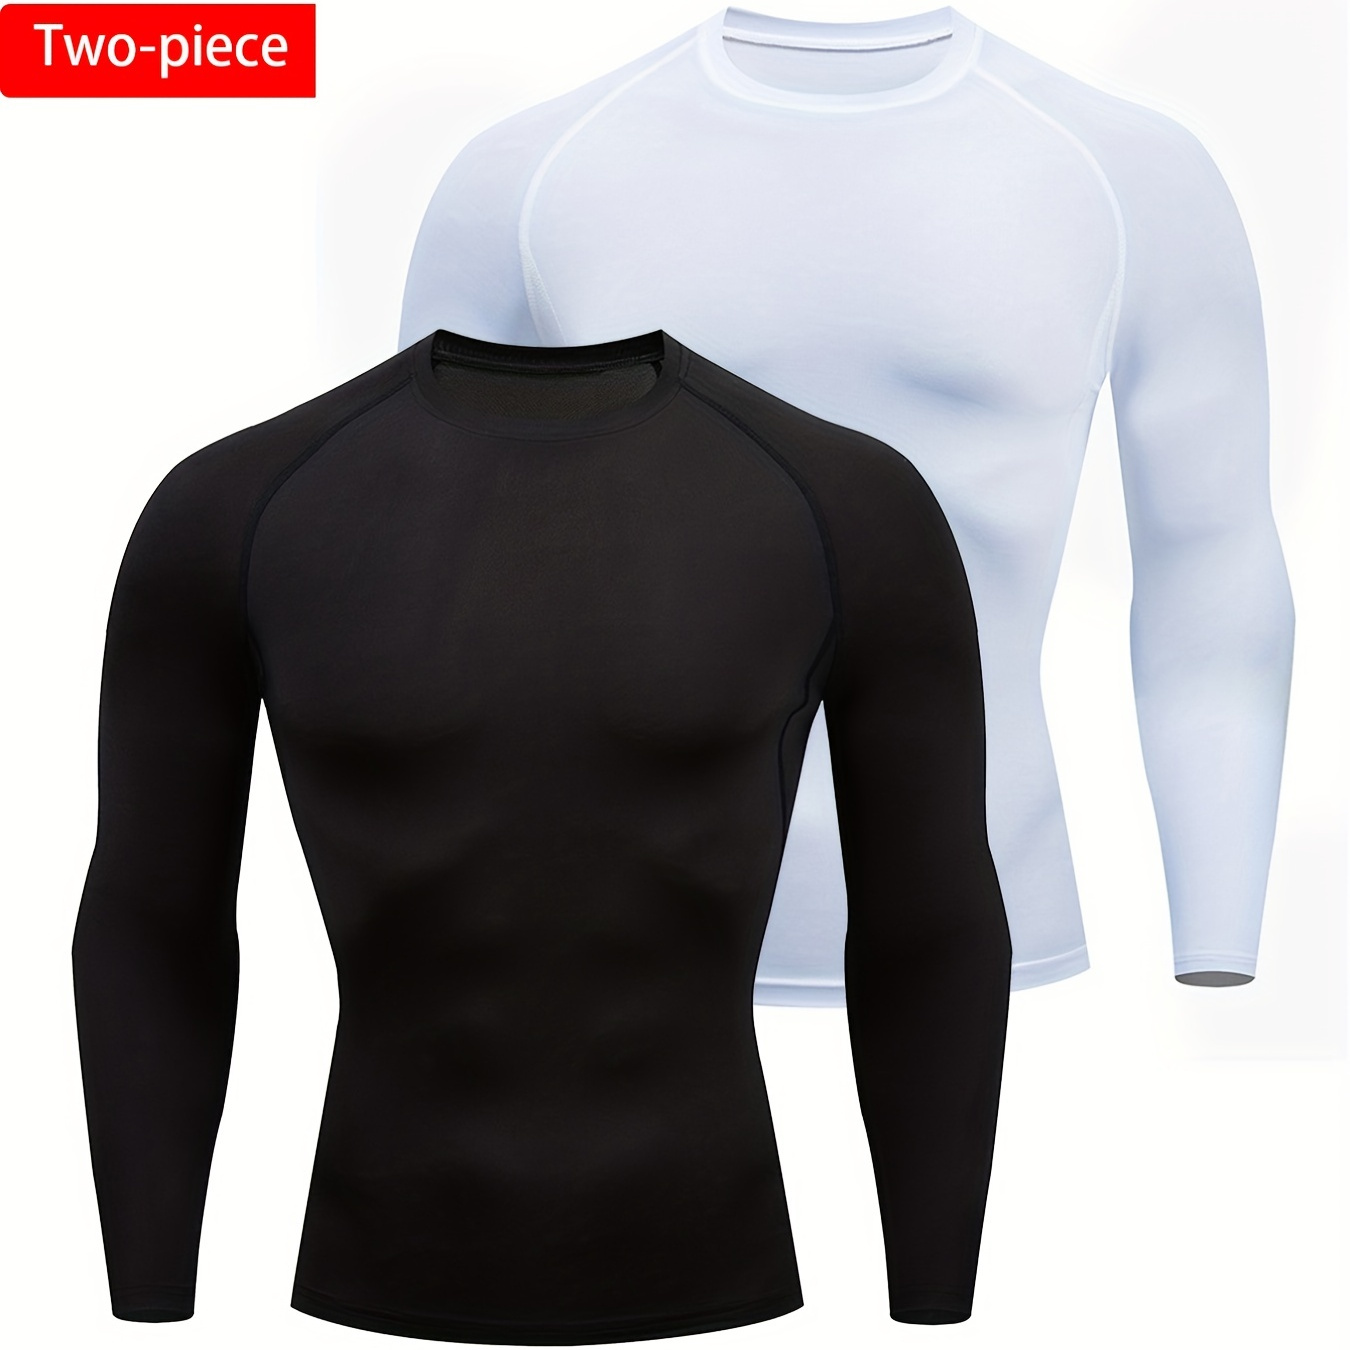 

2pcs Men's Quick Dry Compression Shirt - High Stretch, Breathable & Moisture Wicking For Outdoor Gym, Running & Fitness